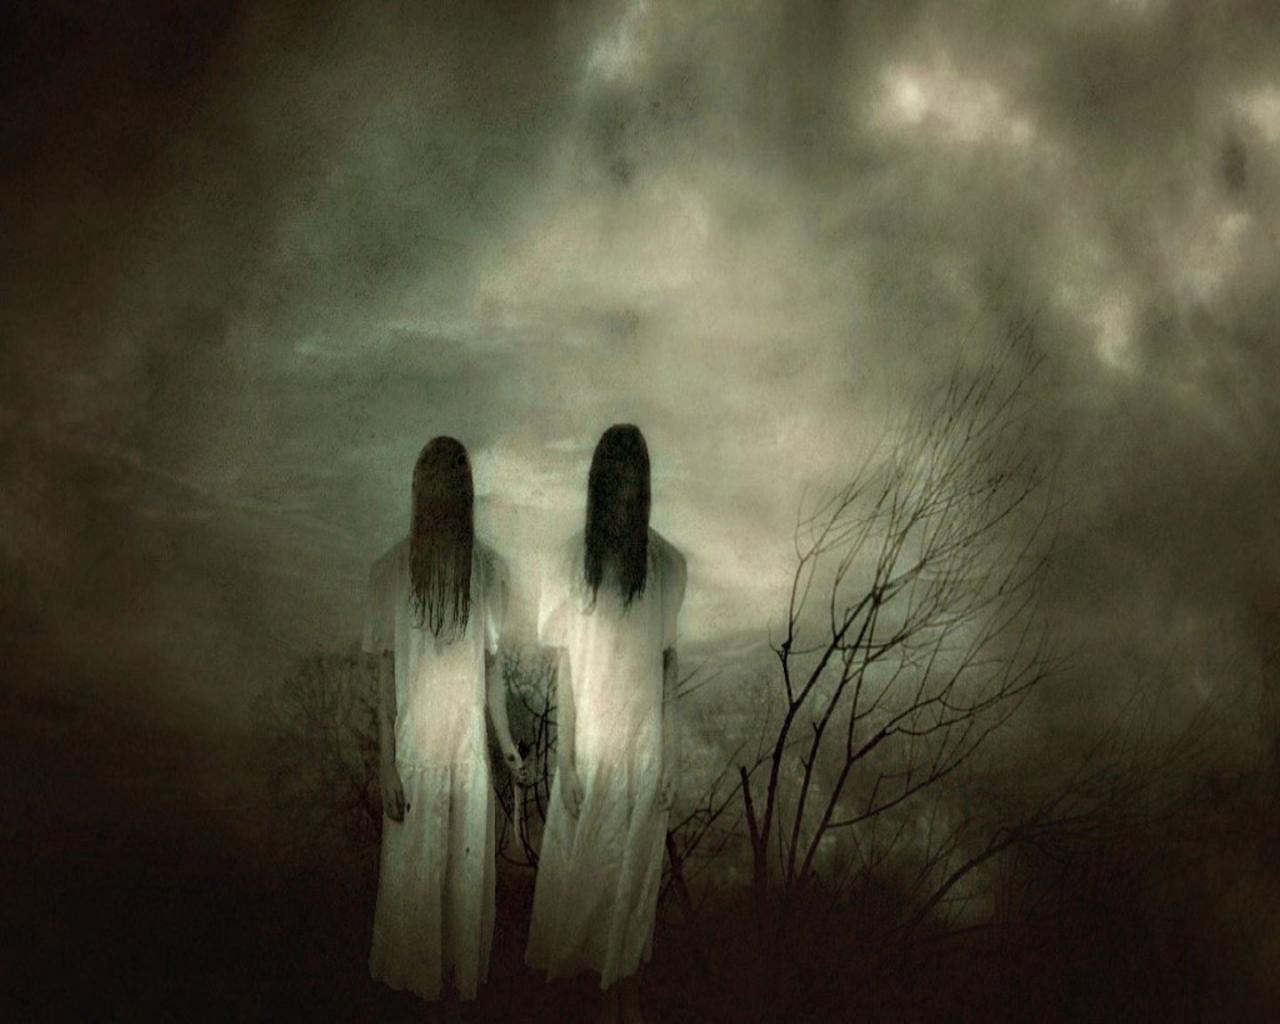  Ghosts wallpaper Scary Images of Real Ghosts hd wallpaper 1280x1024